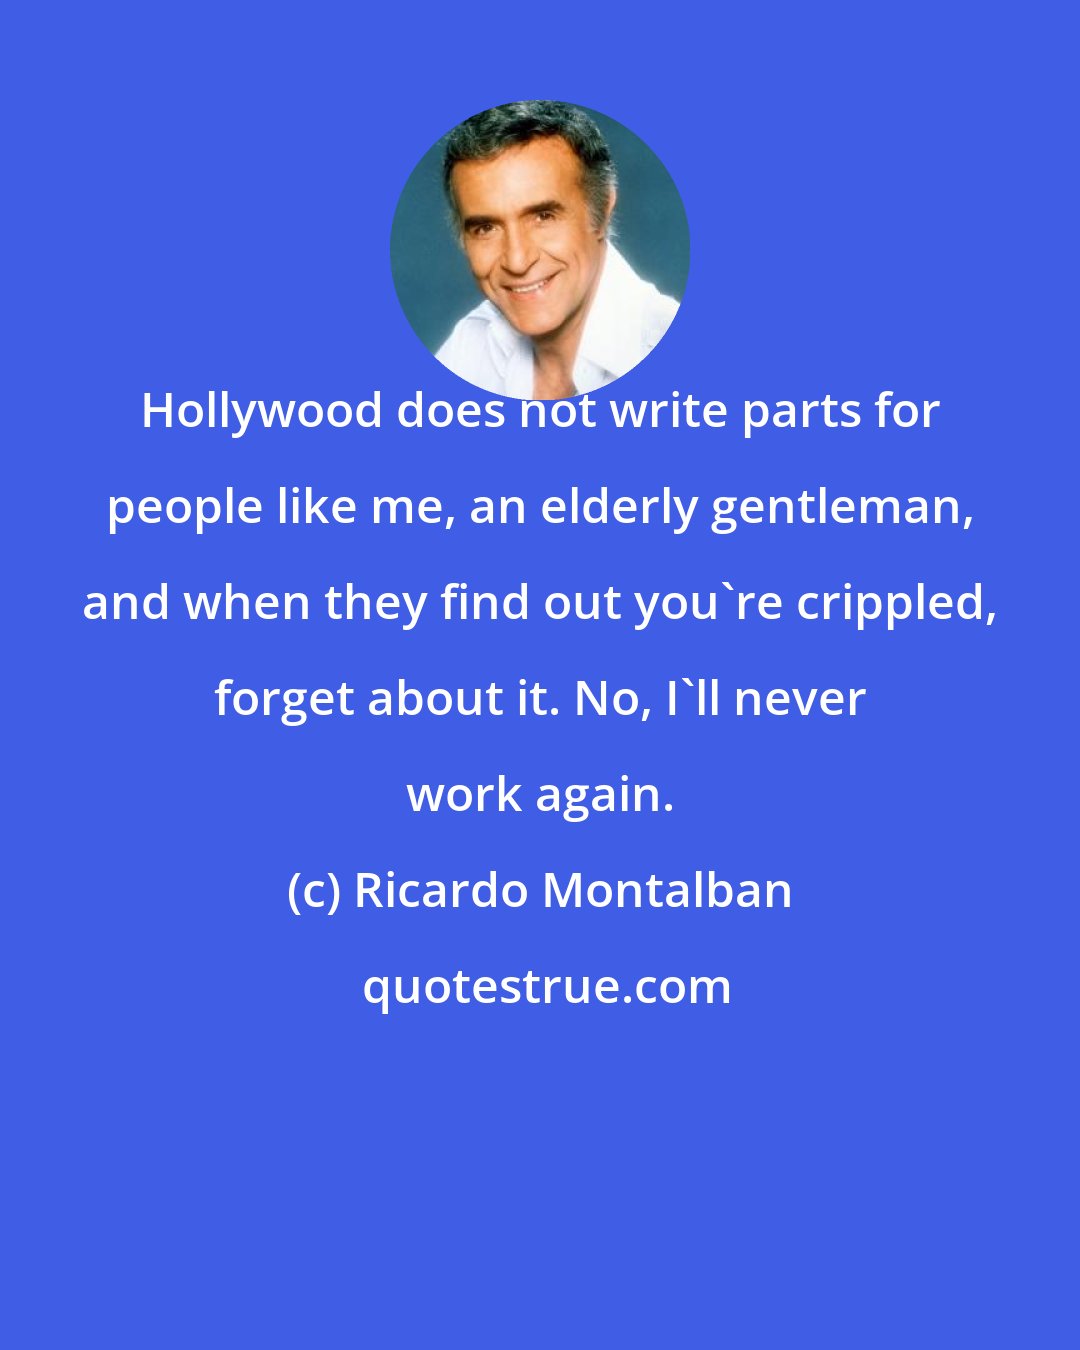 Ricardo Montalban: Hollywood does not write parts for people like me, an elderly gentleman, and when they find out you're crippled, forget about it. No, I'll never work again.